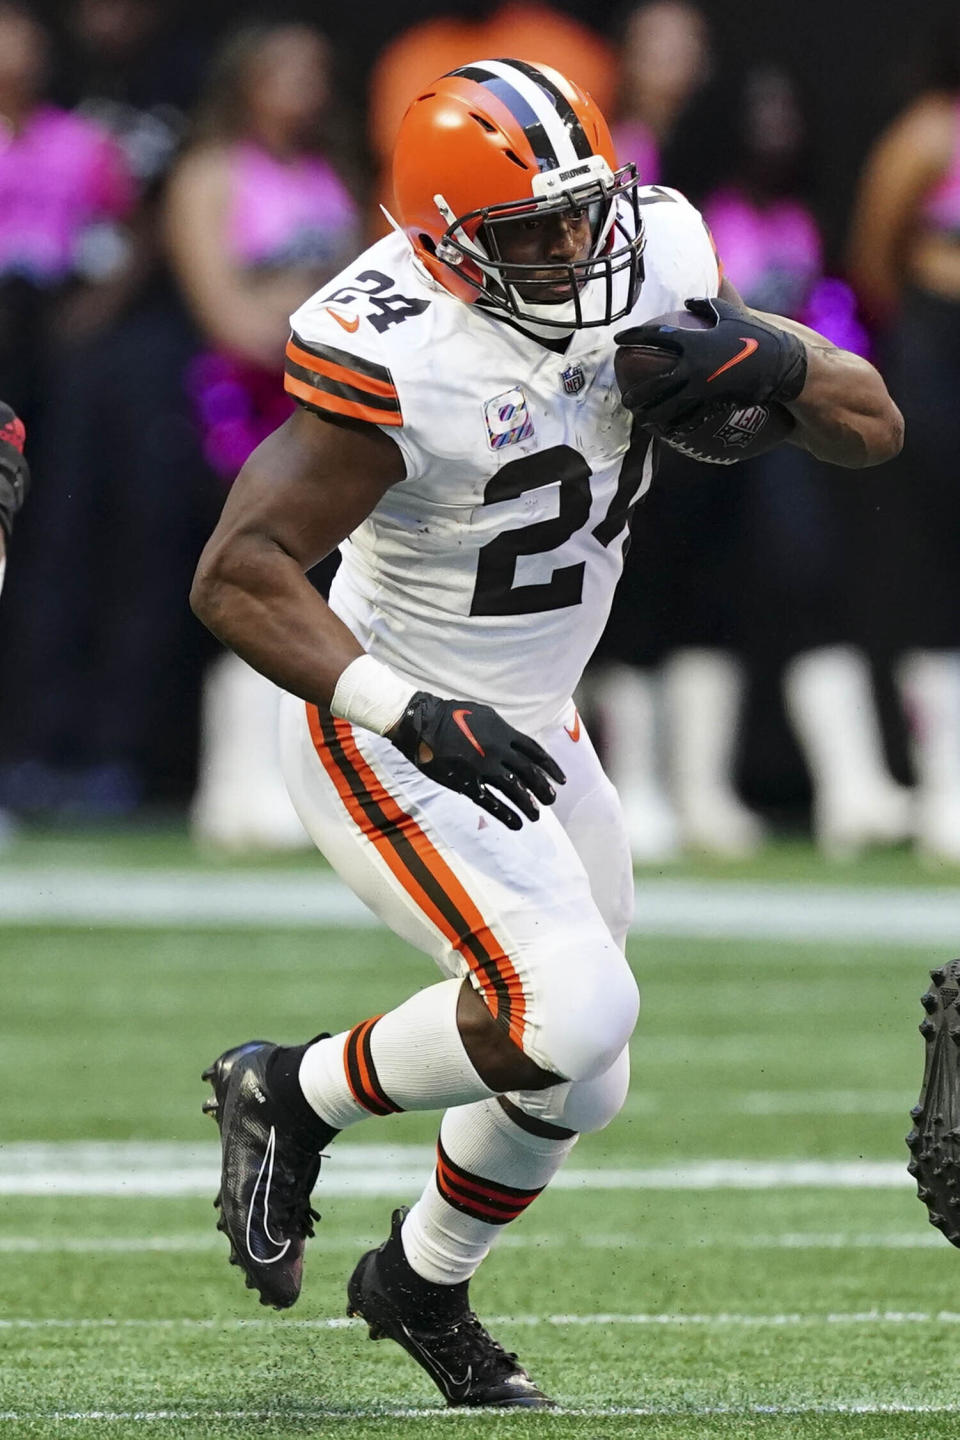 Cleveland Browns running back Nick Chubb (24) runs against the Atlanta Falcons during the first half of an NFL football game, Sunday, Oct. 2, 2022, in Atlanta. (AP Photo/John Bazemore)